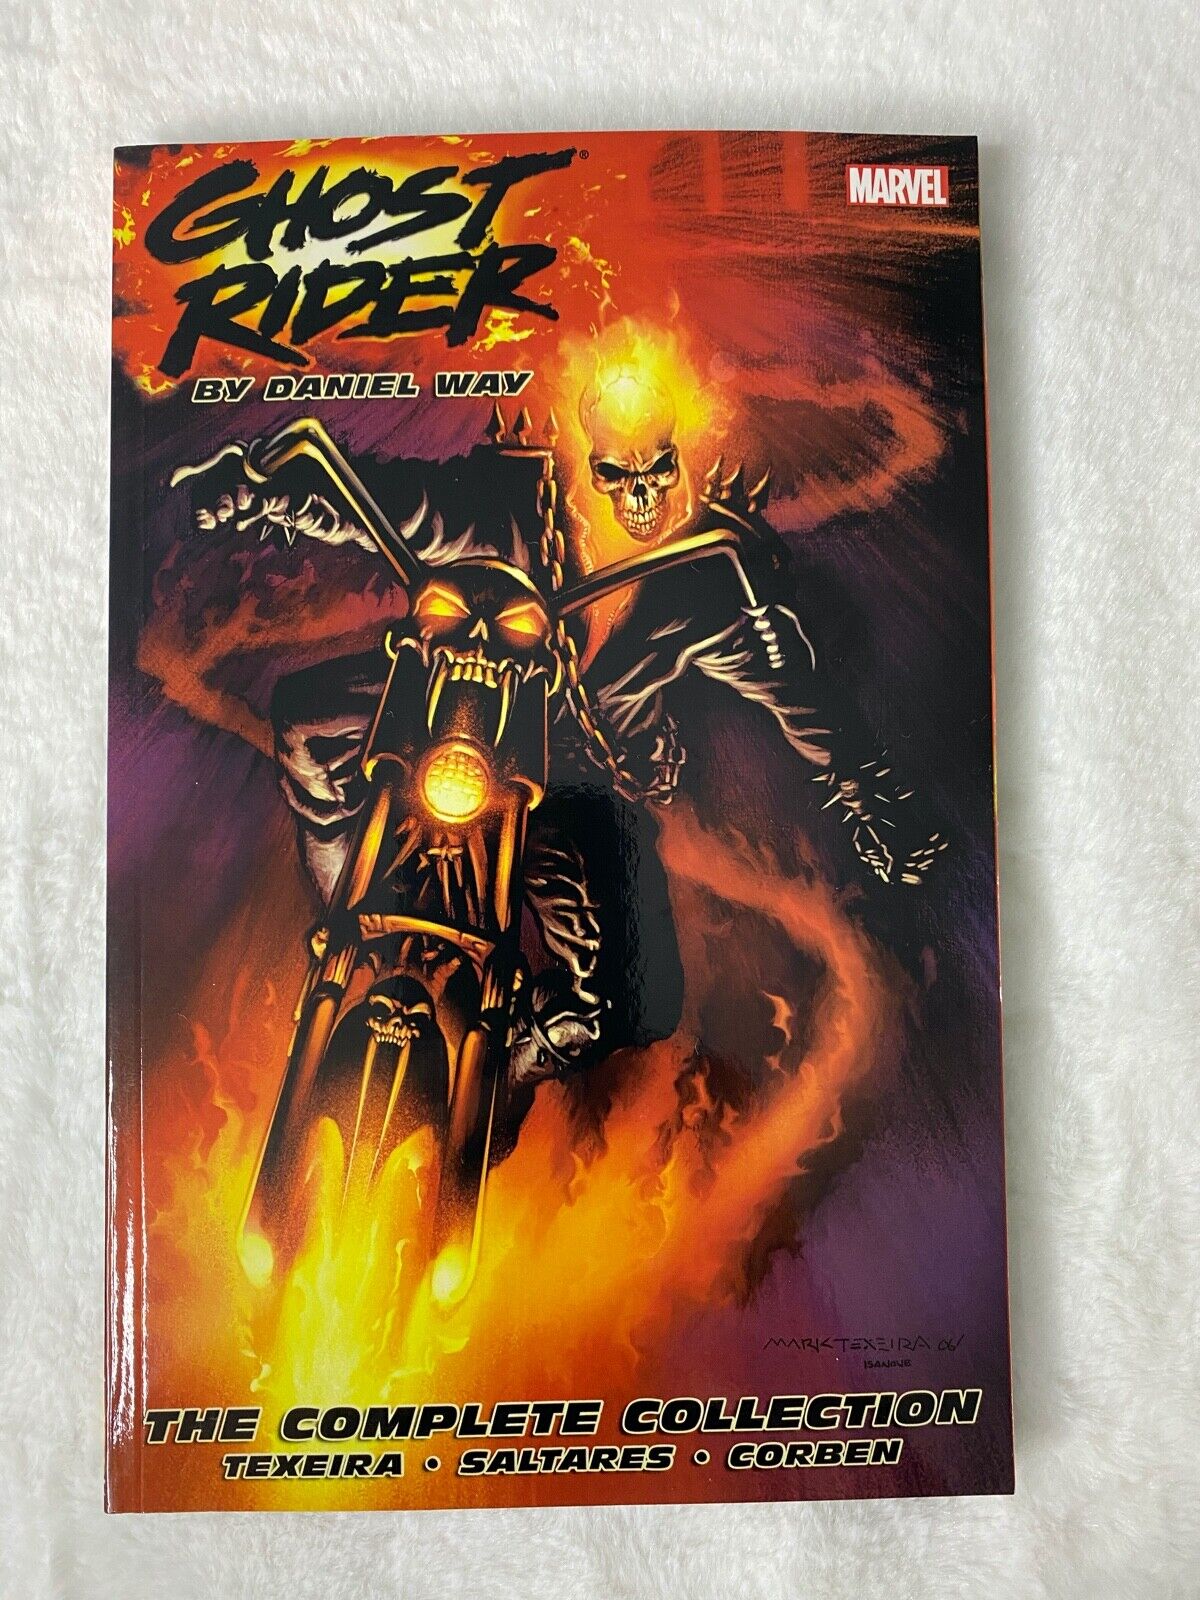 GHOST RIDER BY DANIEL WAY: THE COMPLETE COLLECTION By Marvel Comics *BRAND NEW*